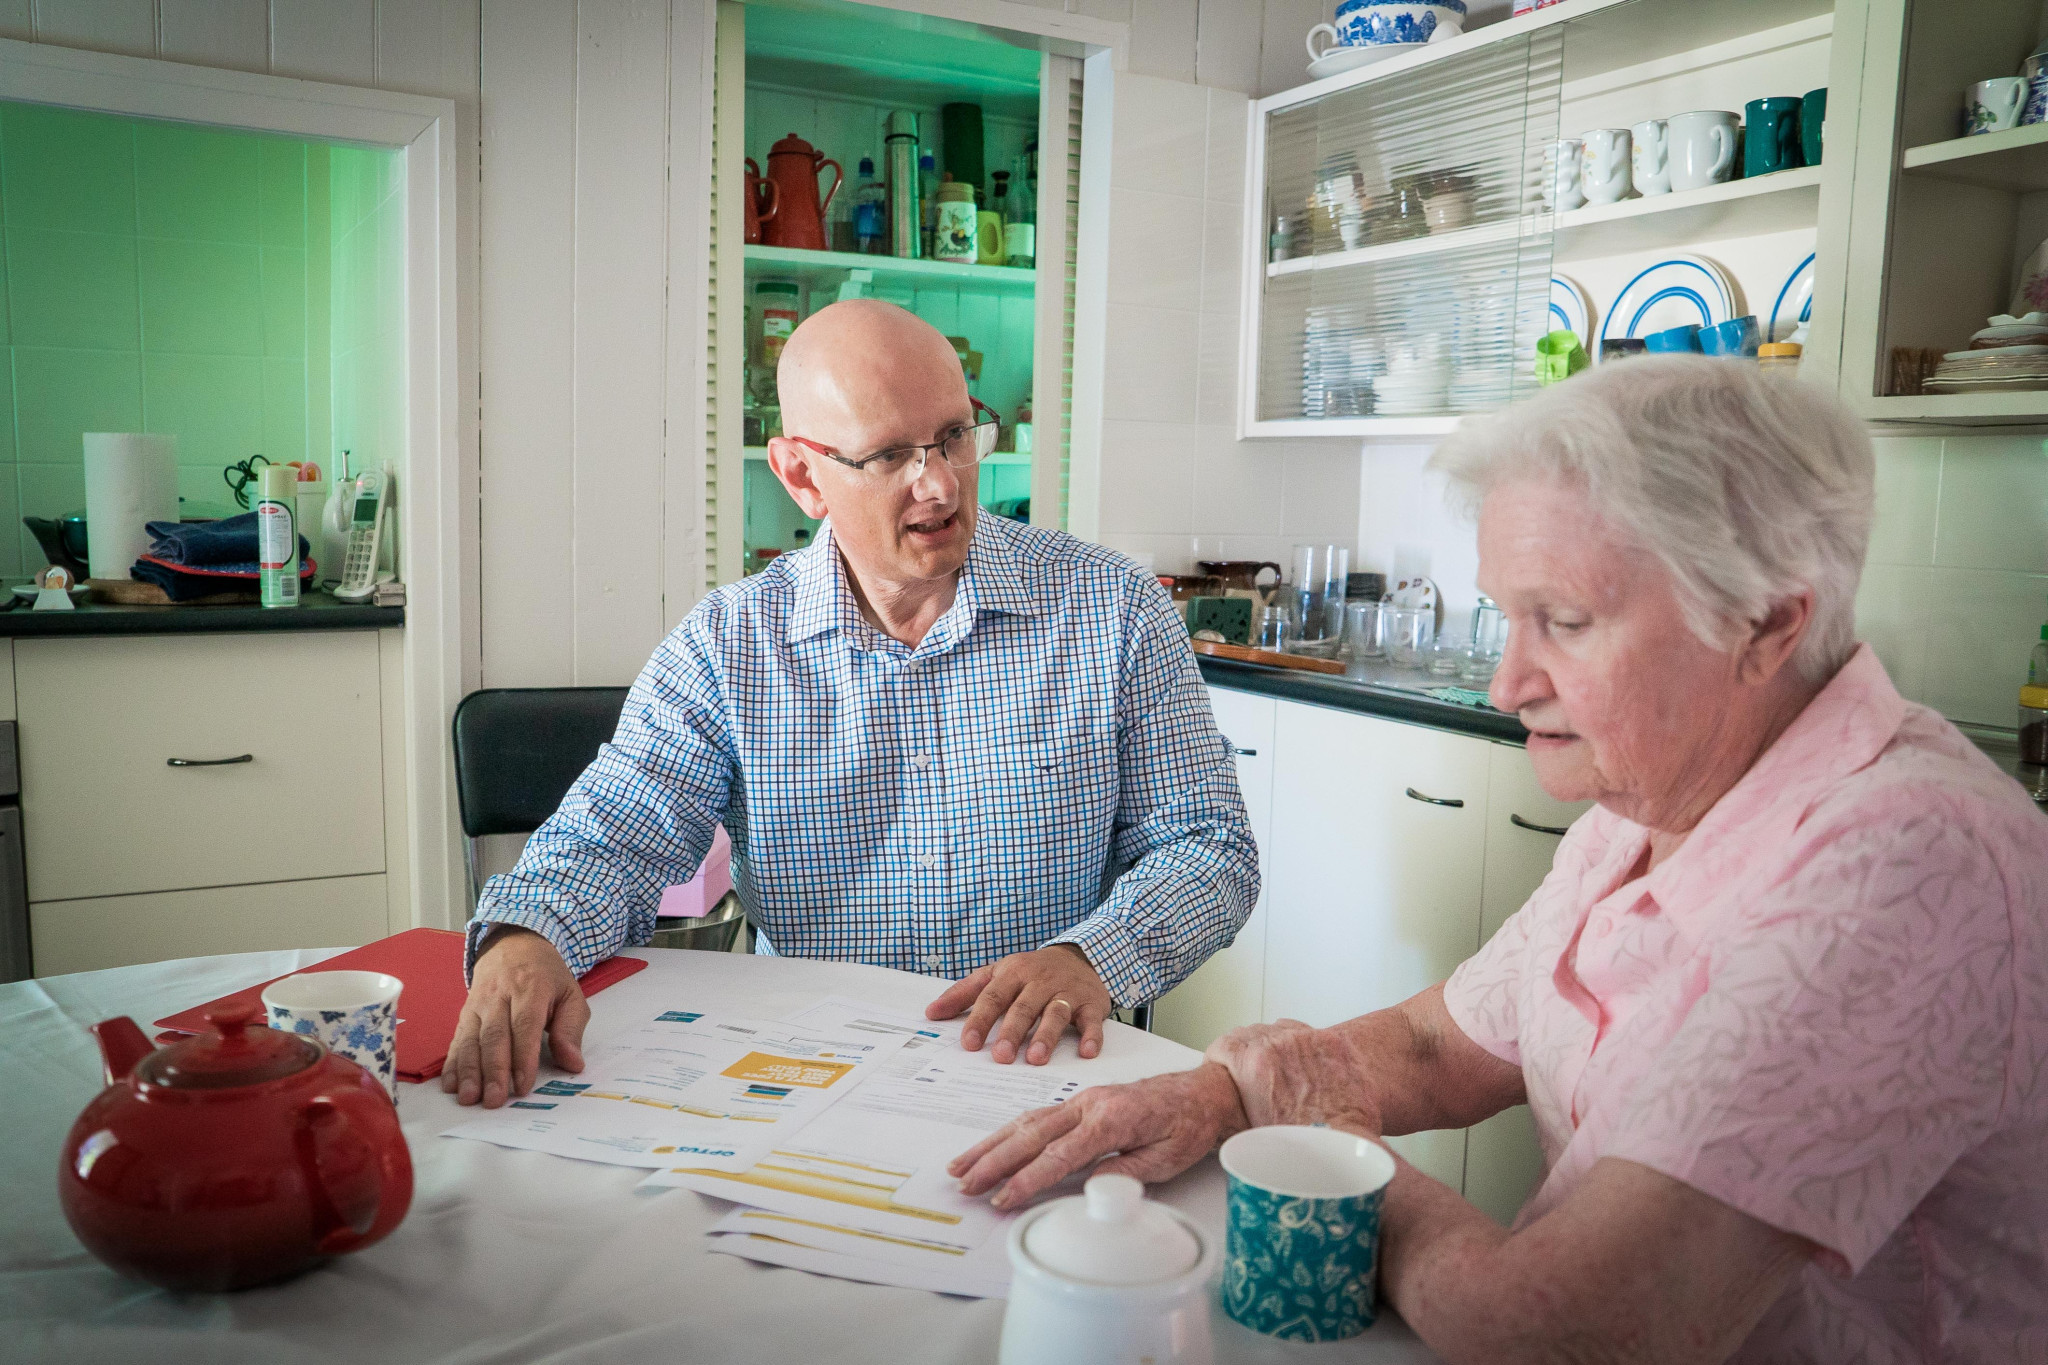 Federal Member for Blair Shayne Neumann talks to a local pensioner about cost of living issues and government assistance for seniors.